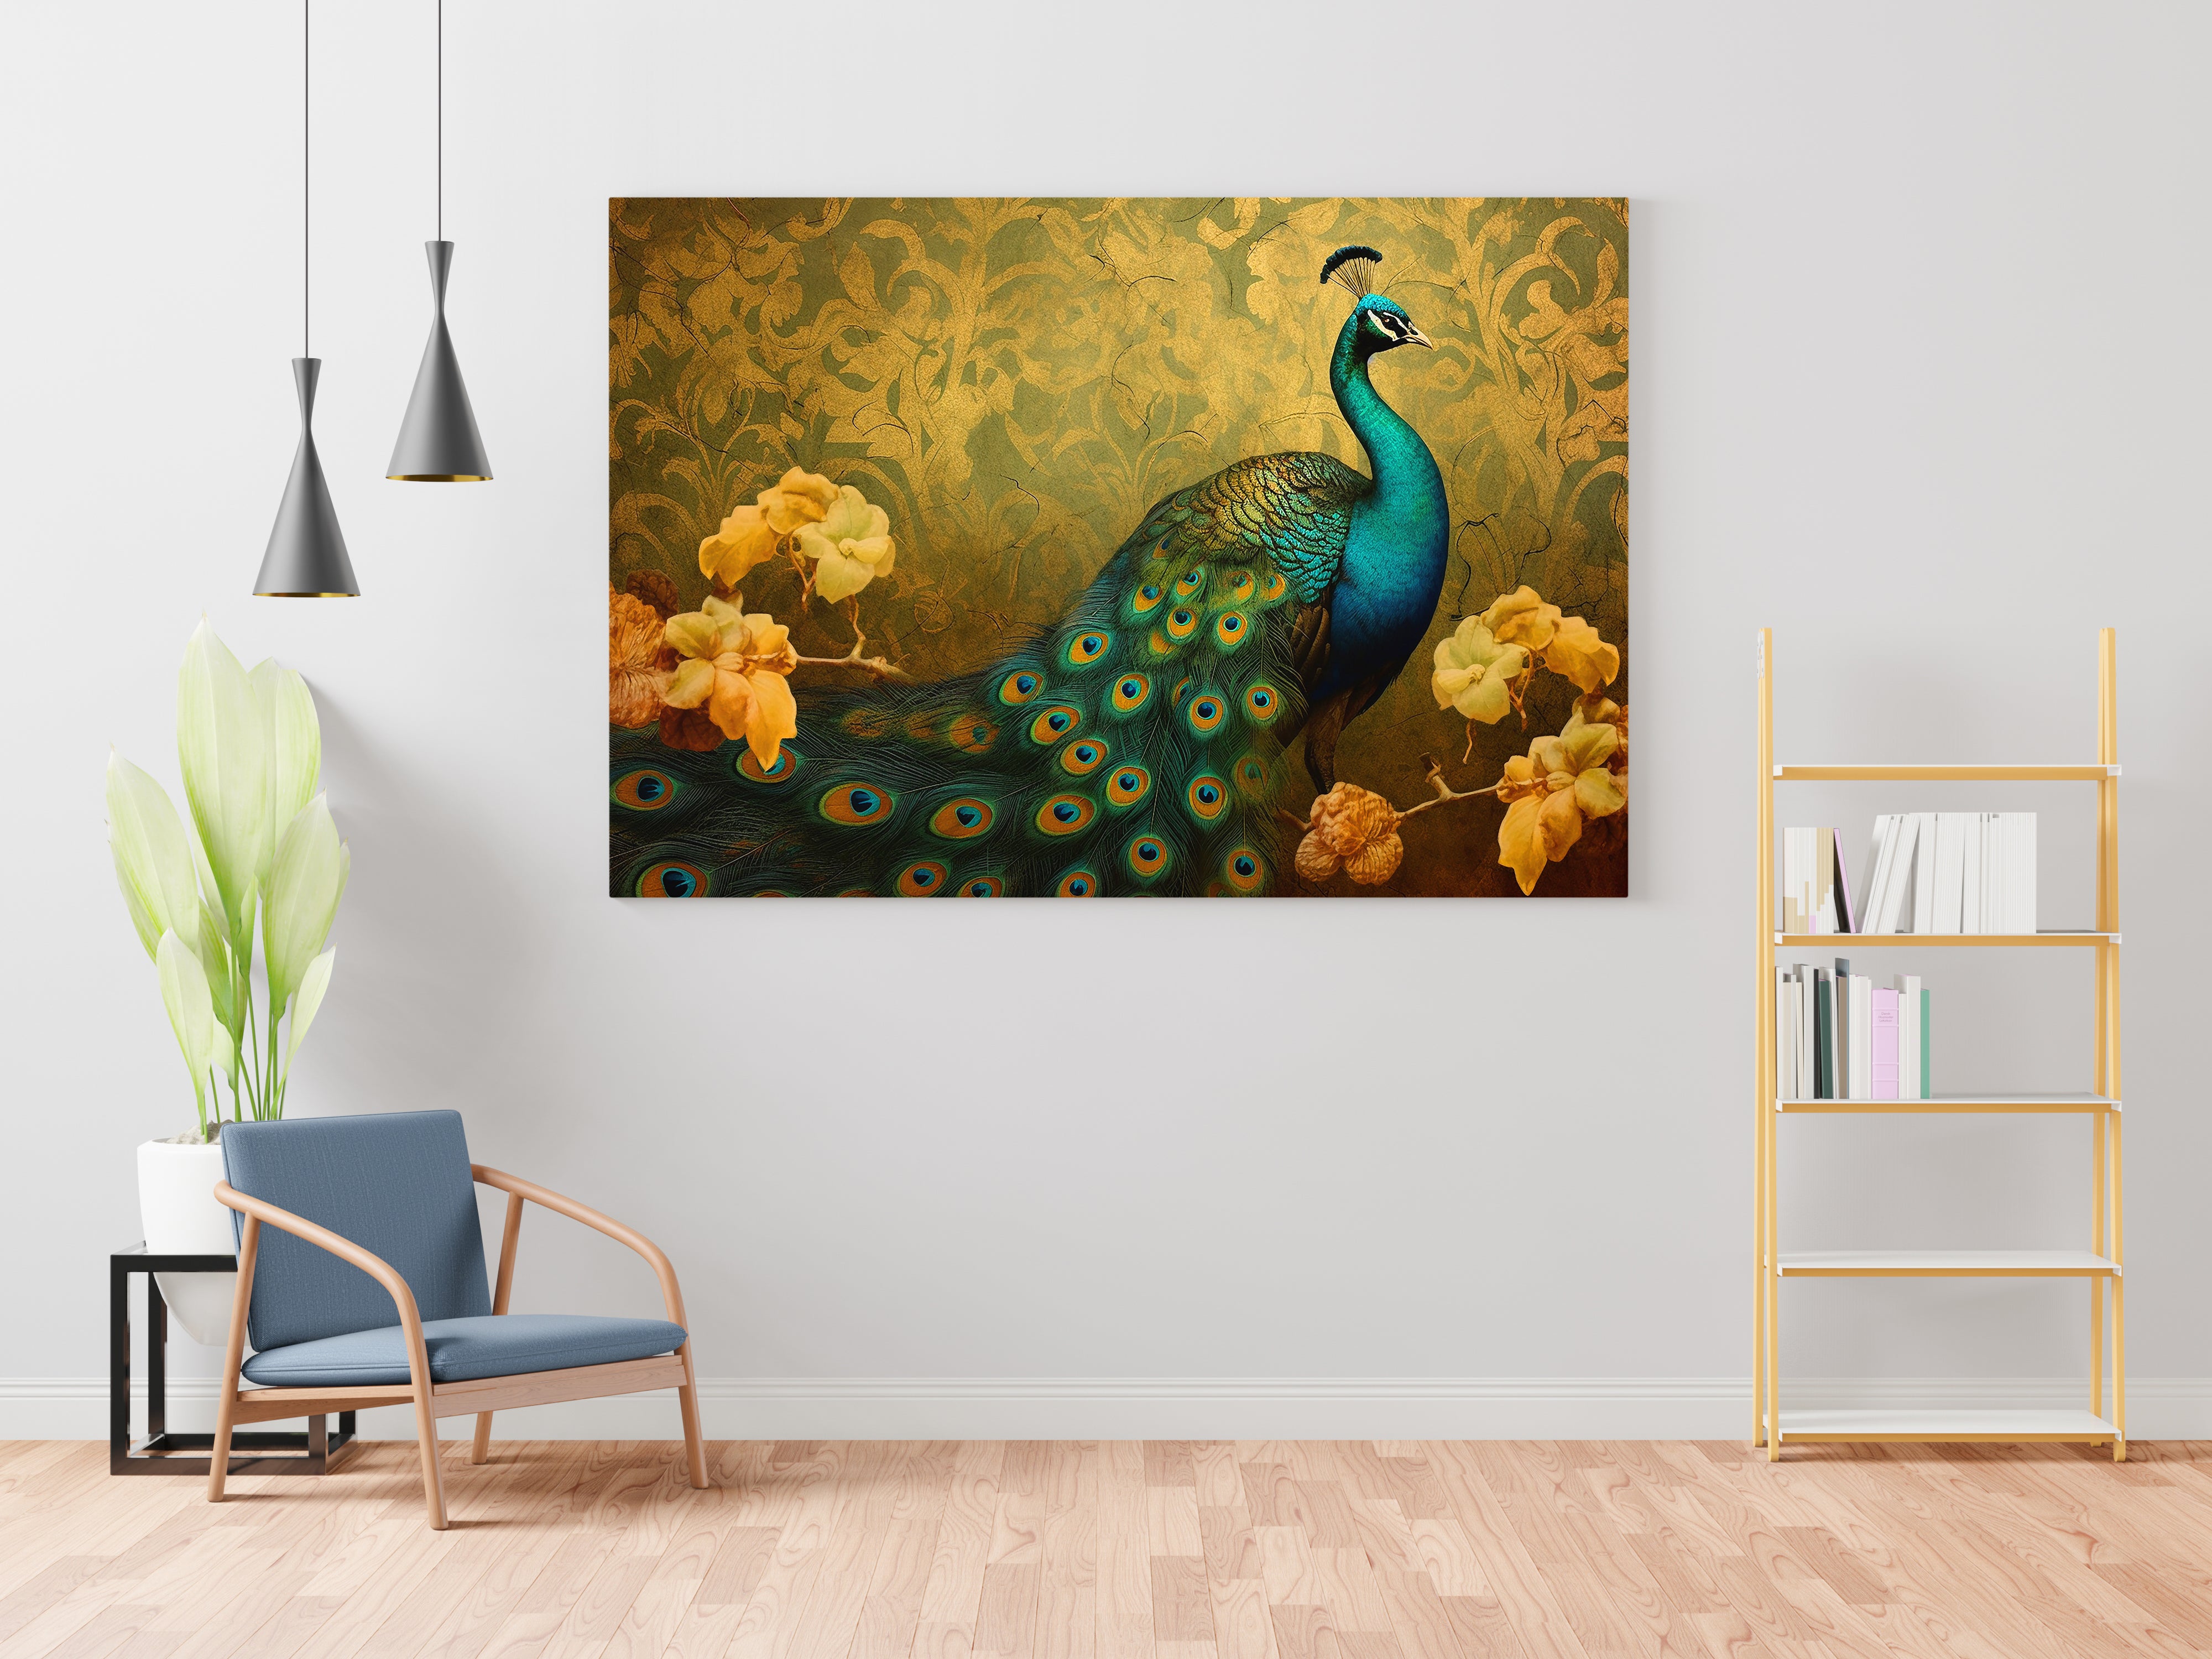 Peacock Abstract Art Canvas Wall Painting